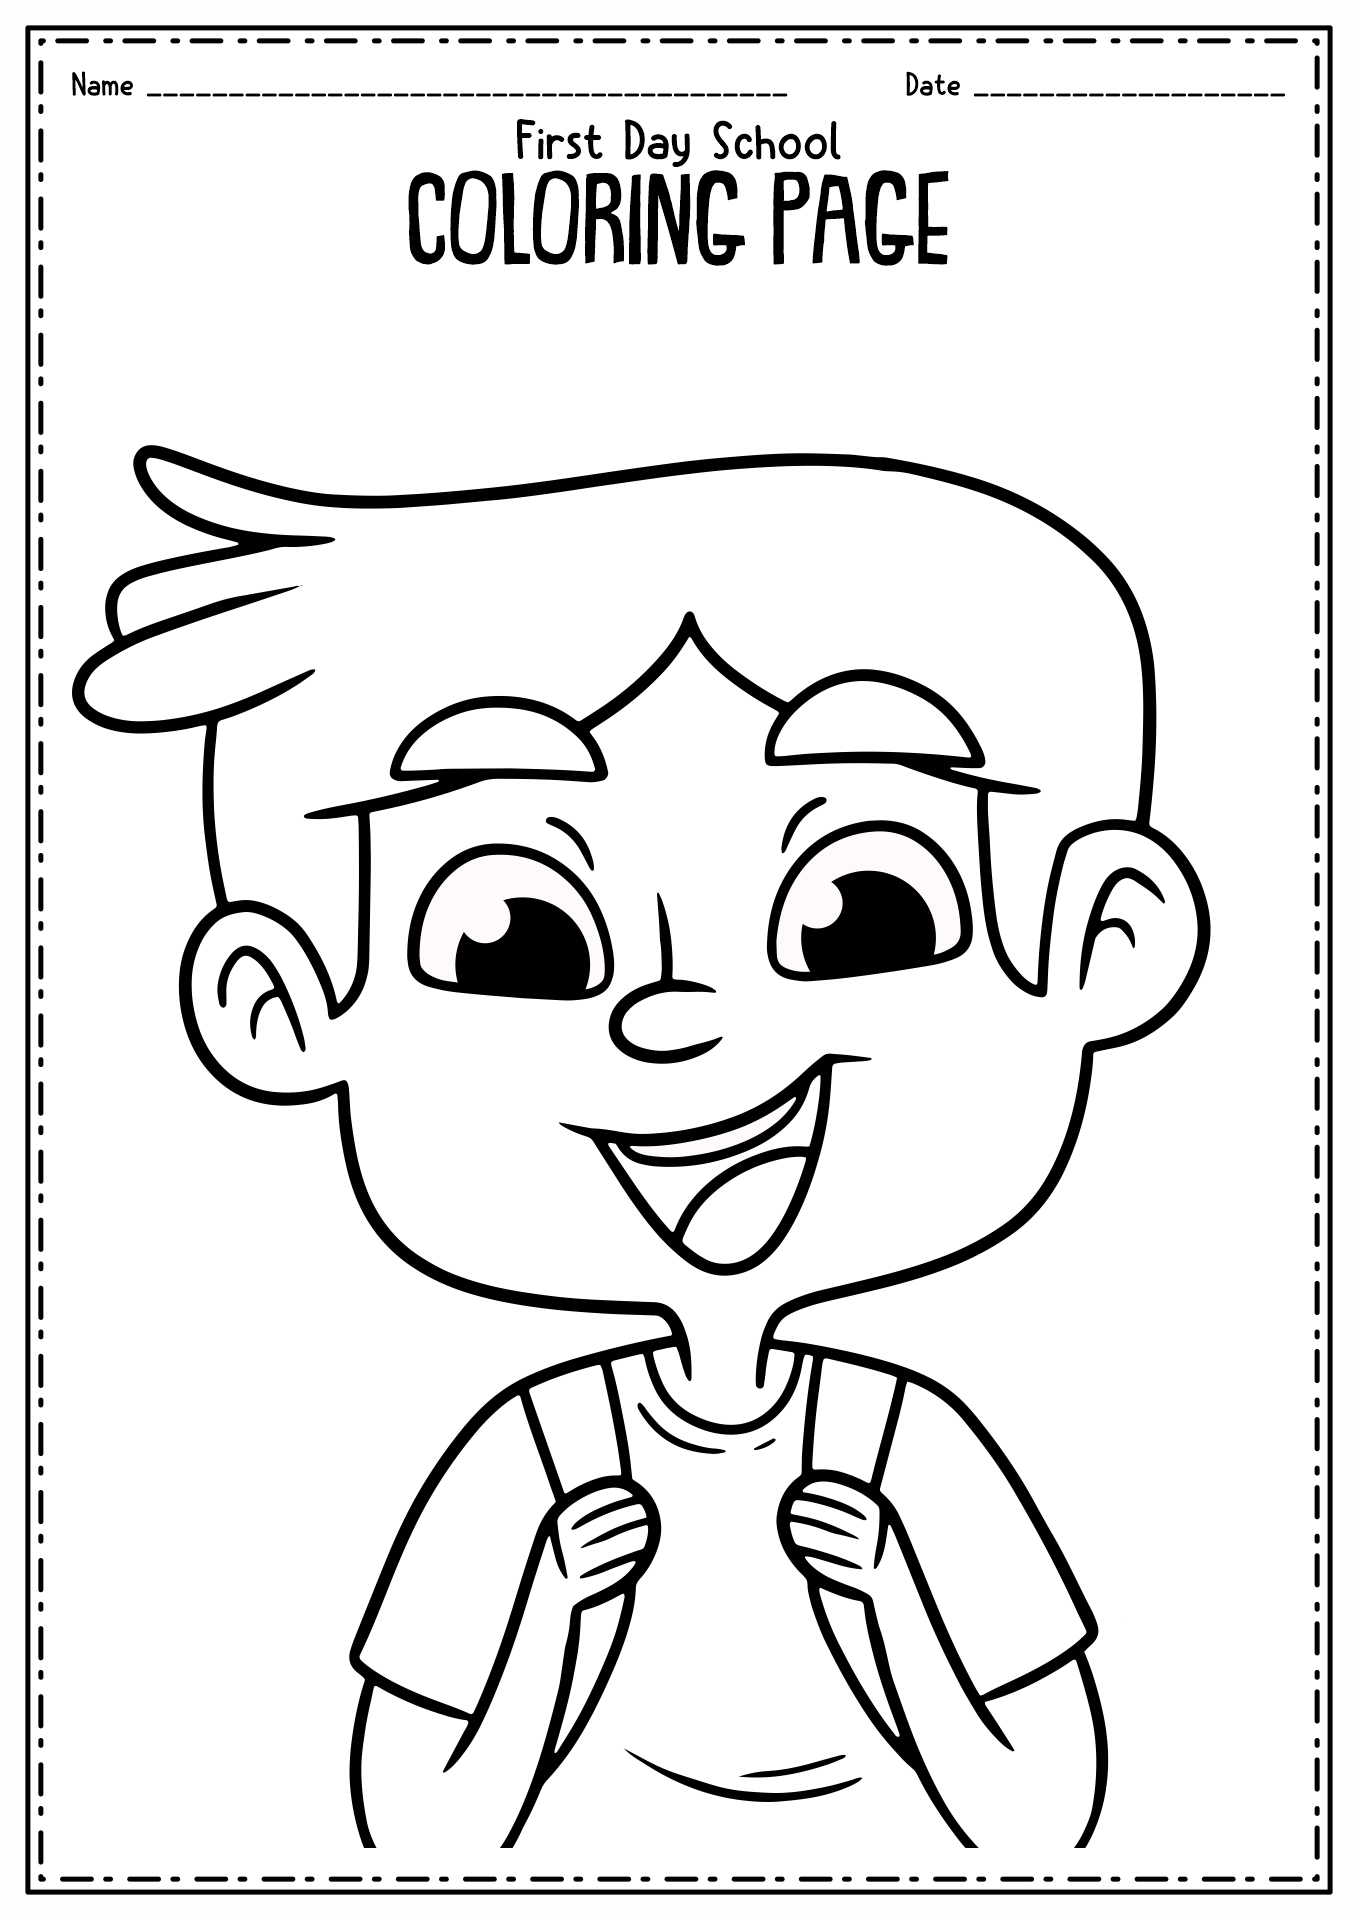 My First Day of School Coloring Page